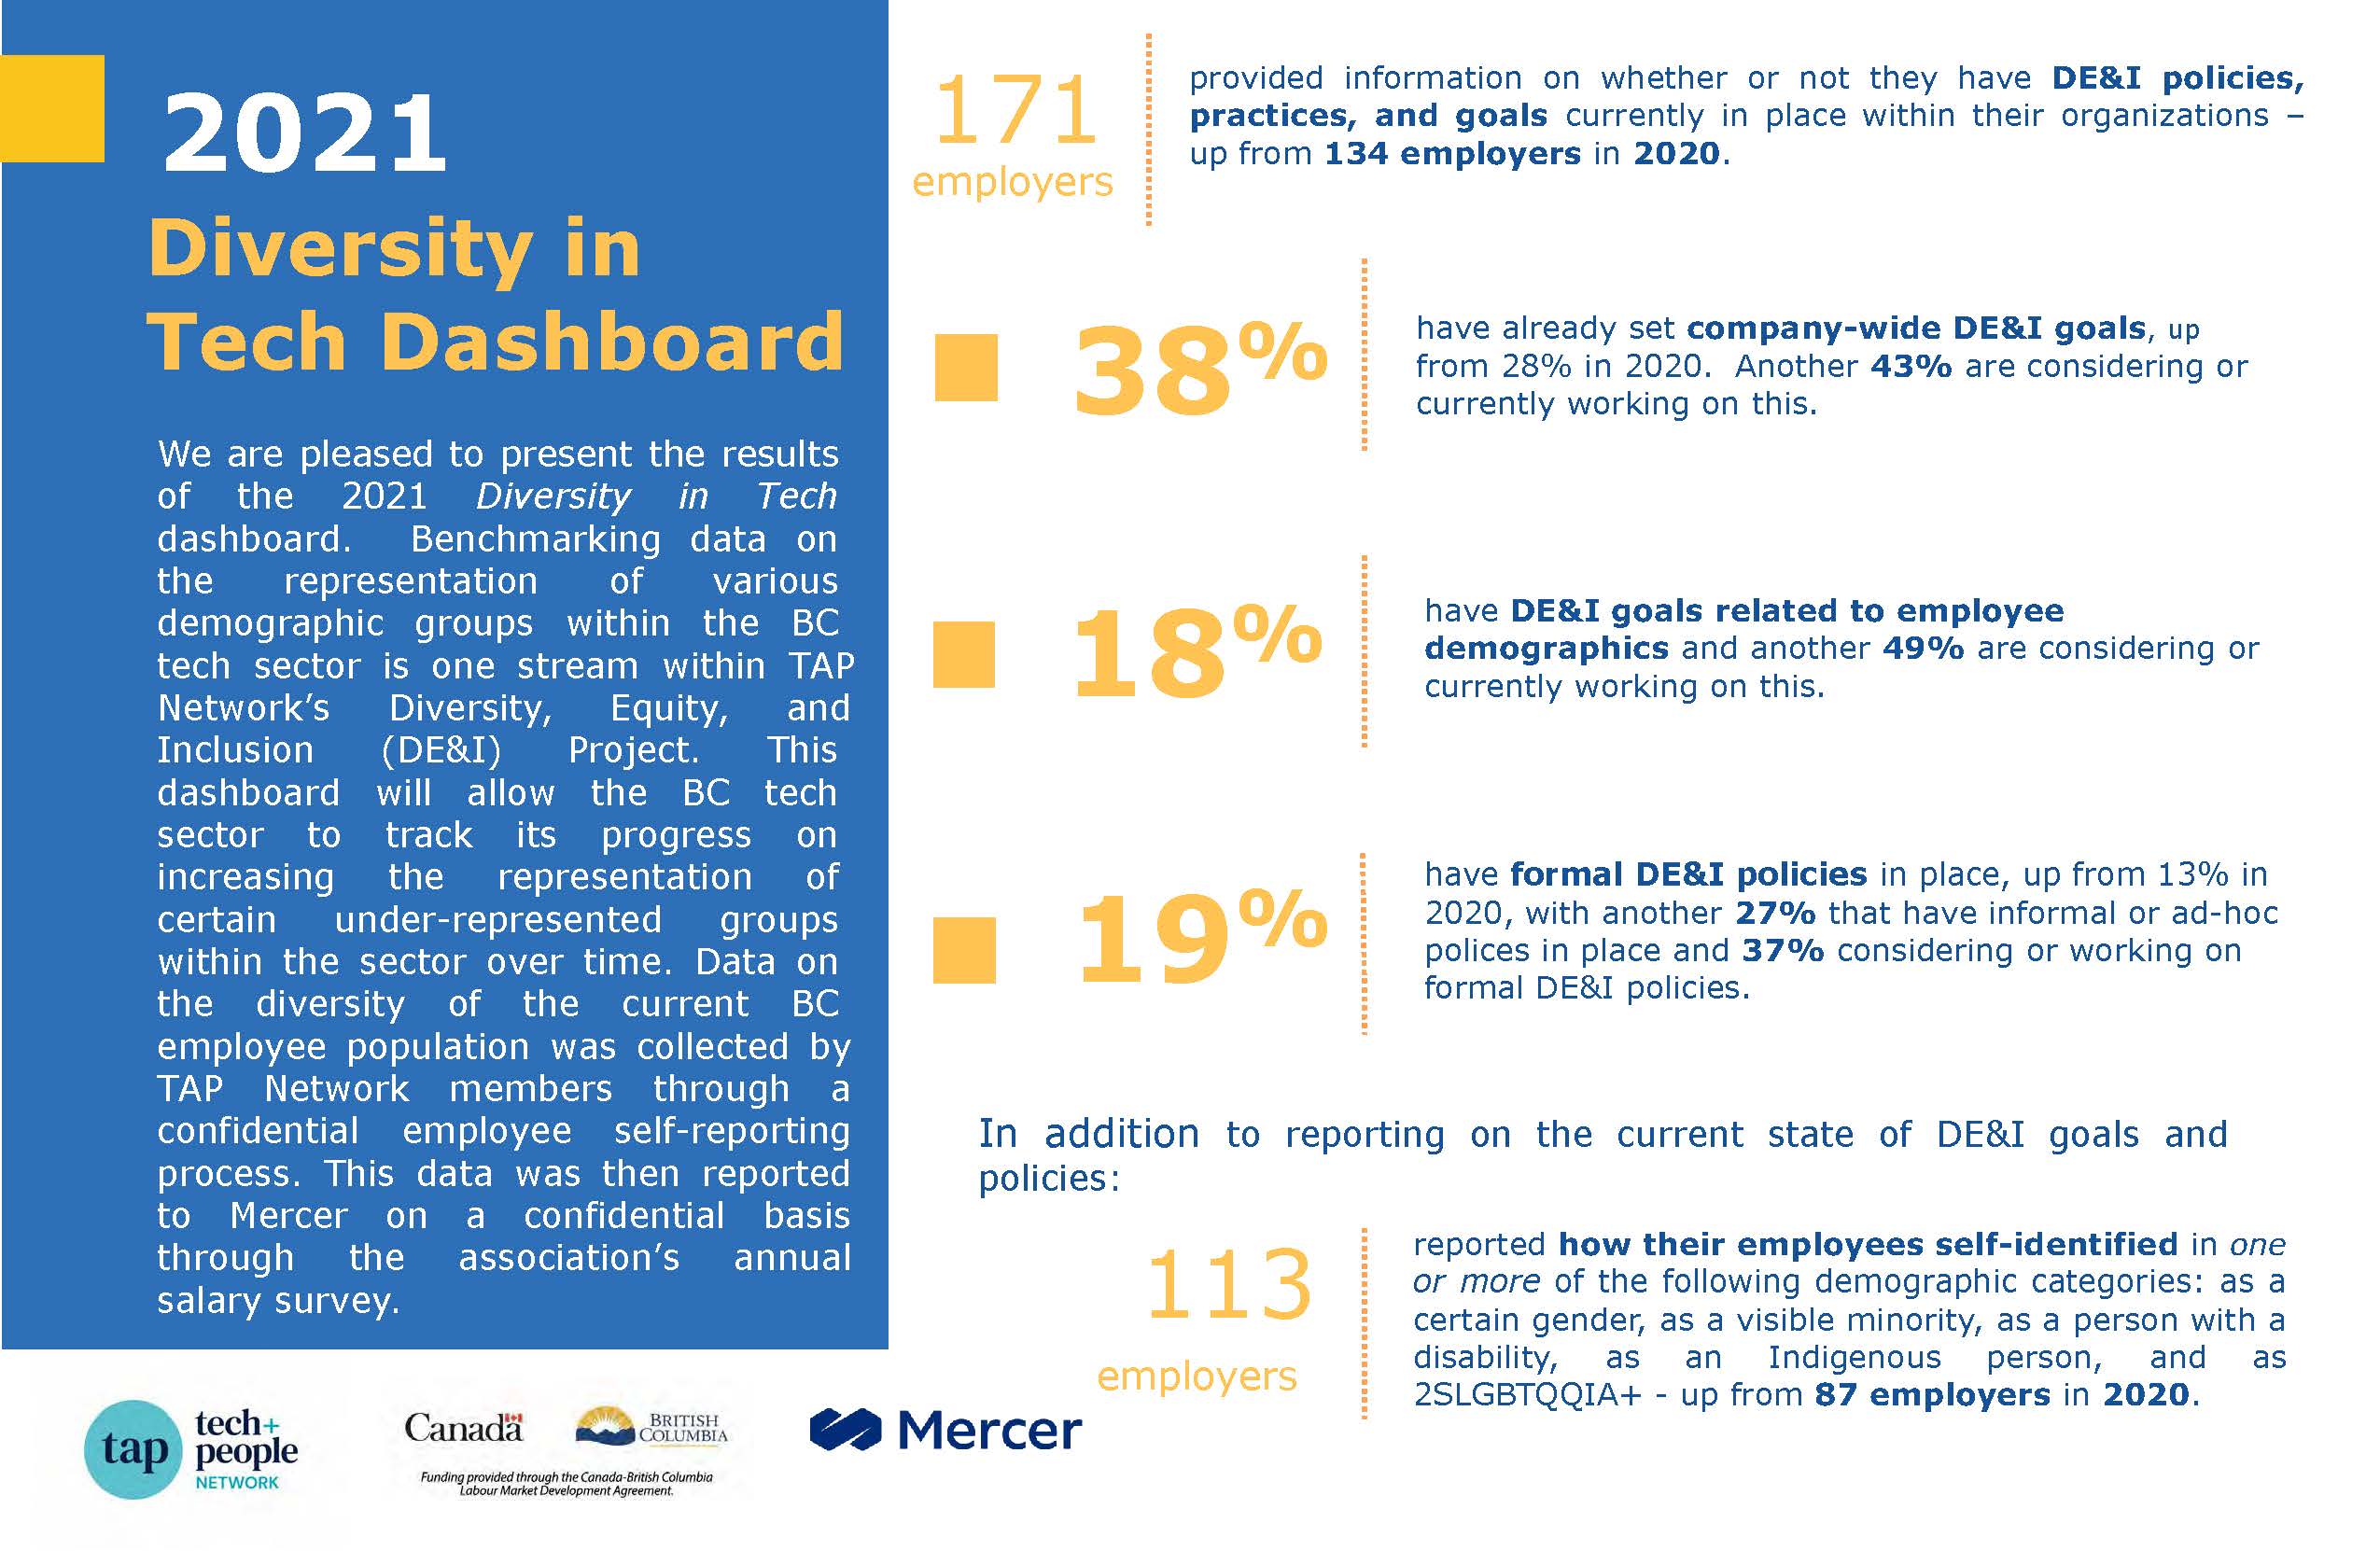 Page 1 of the 2021 Diversity Dashboard